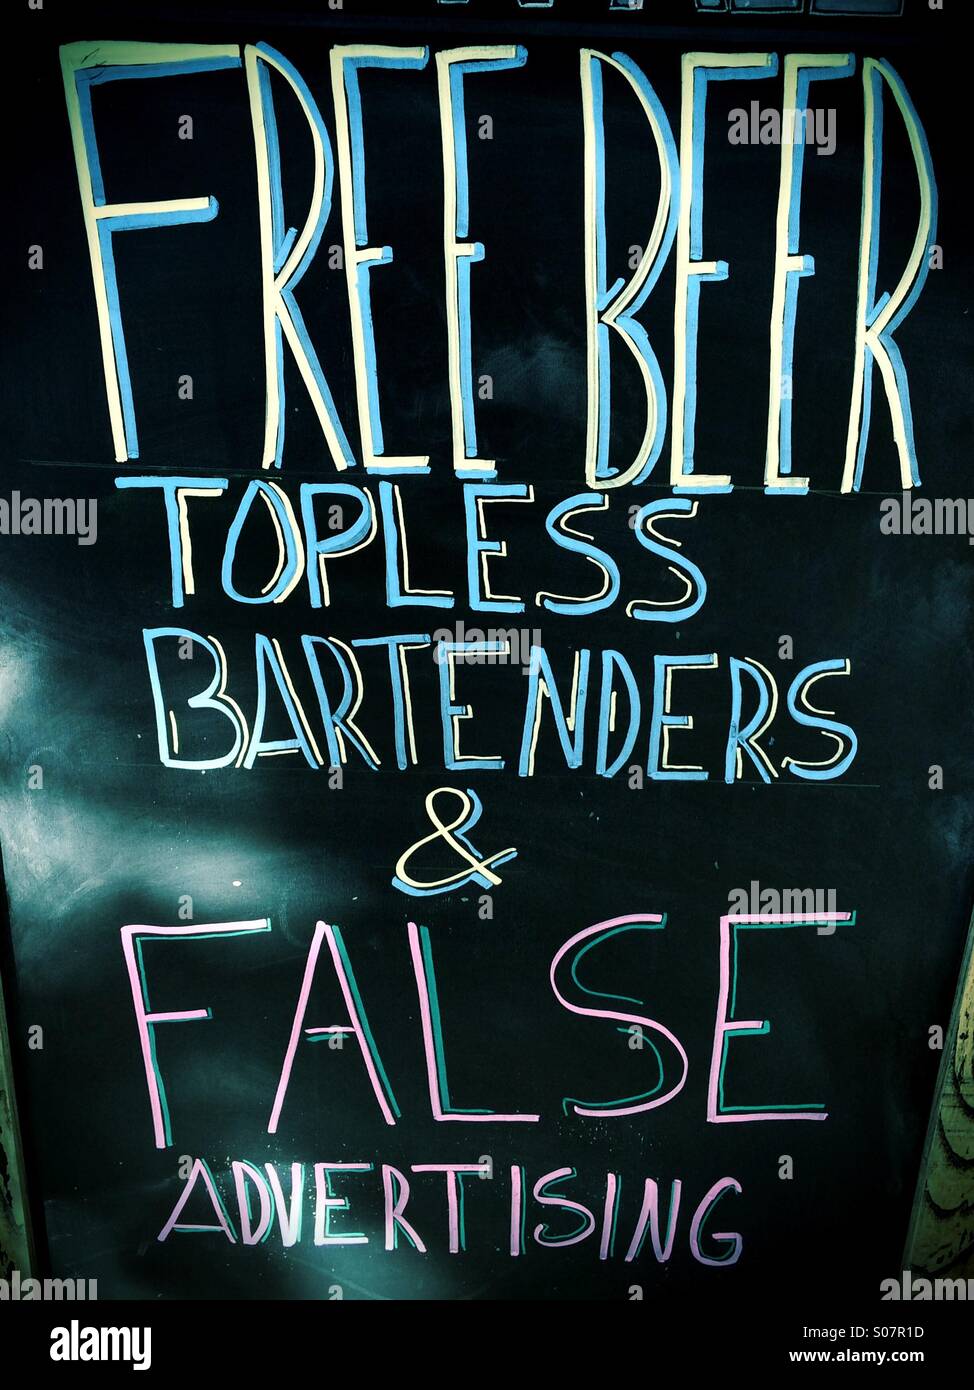 Free beer, topless bartenders and false advertising Stock Photo - Alamy